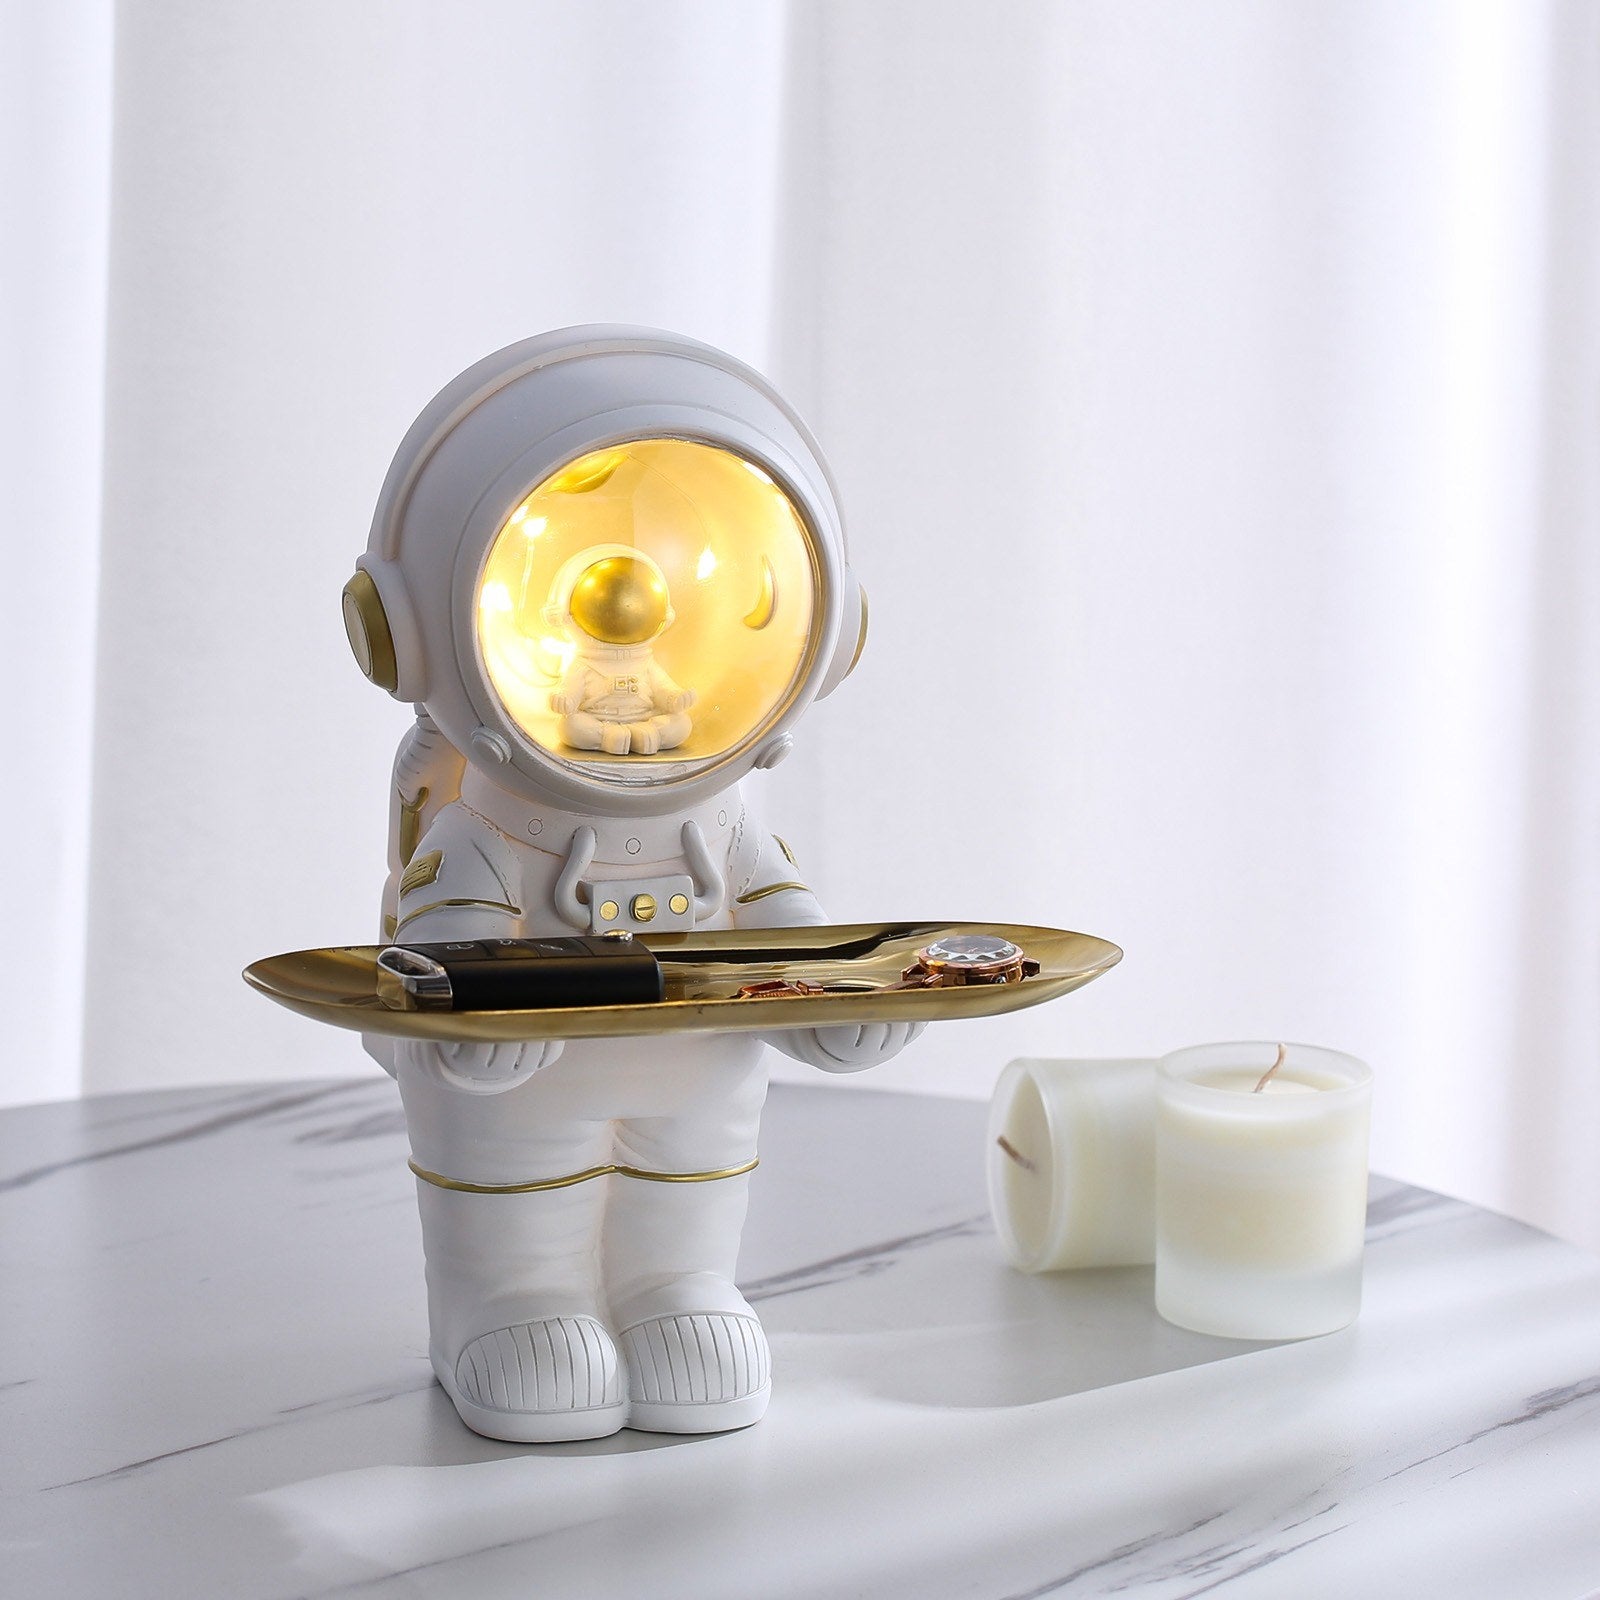 This figurine of an astronaut in his space suit is the perfect gift for someone who has always dreamed of exploring space or for people who are fascinated by what living on Mars might be like